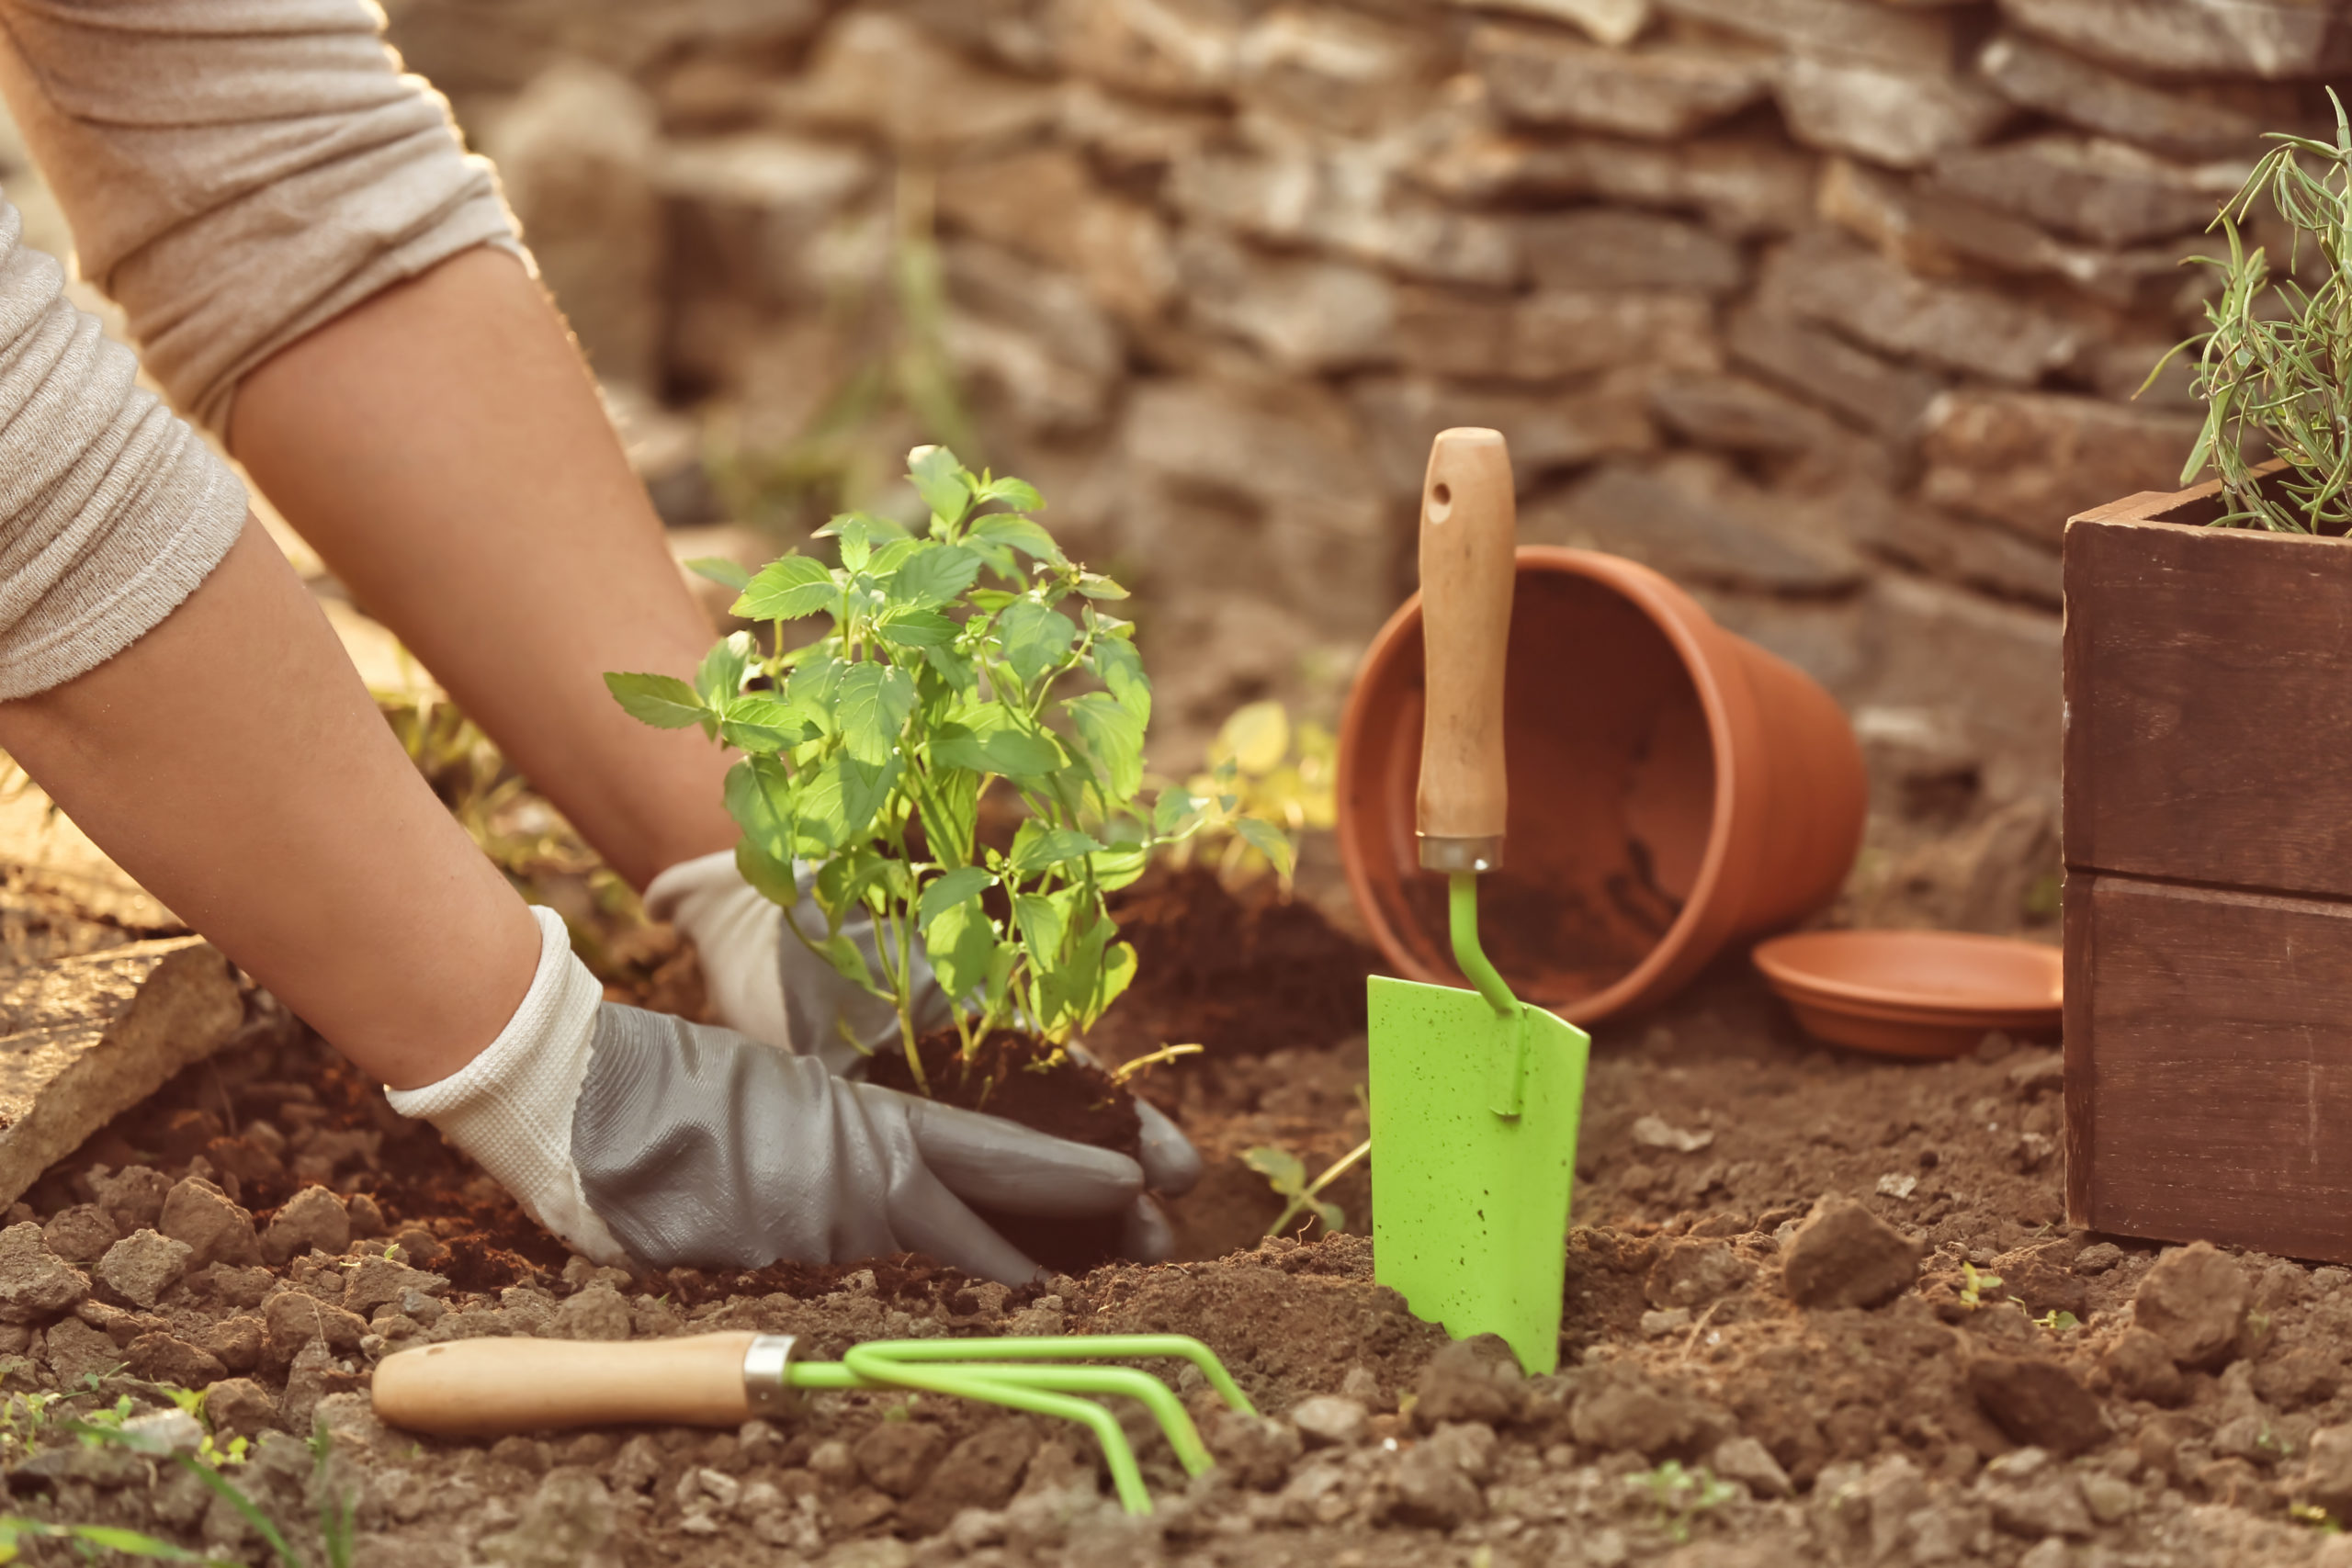 Gardening As A Recovery Tool